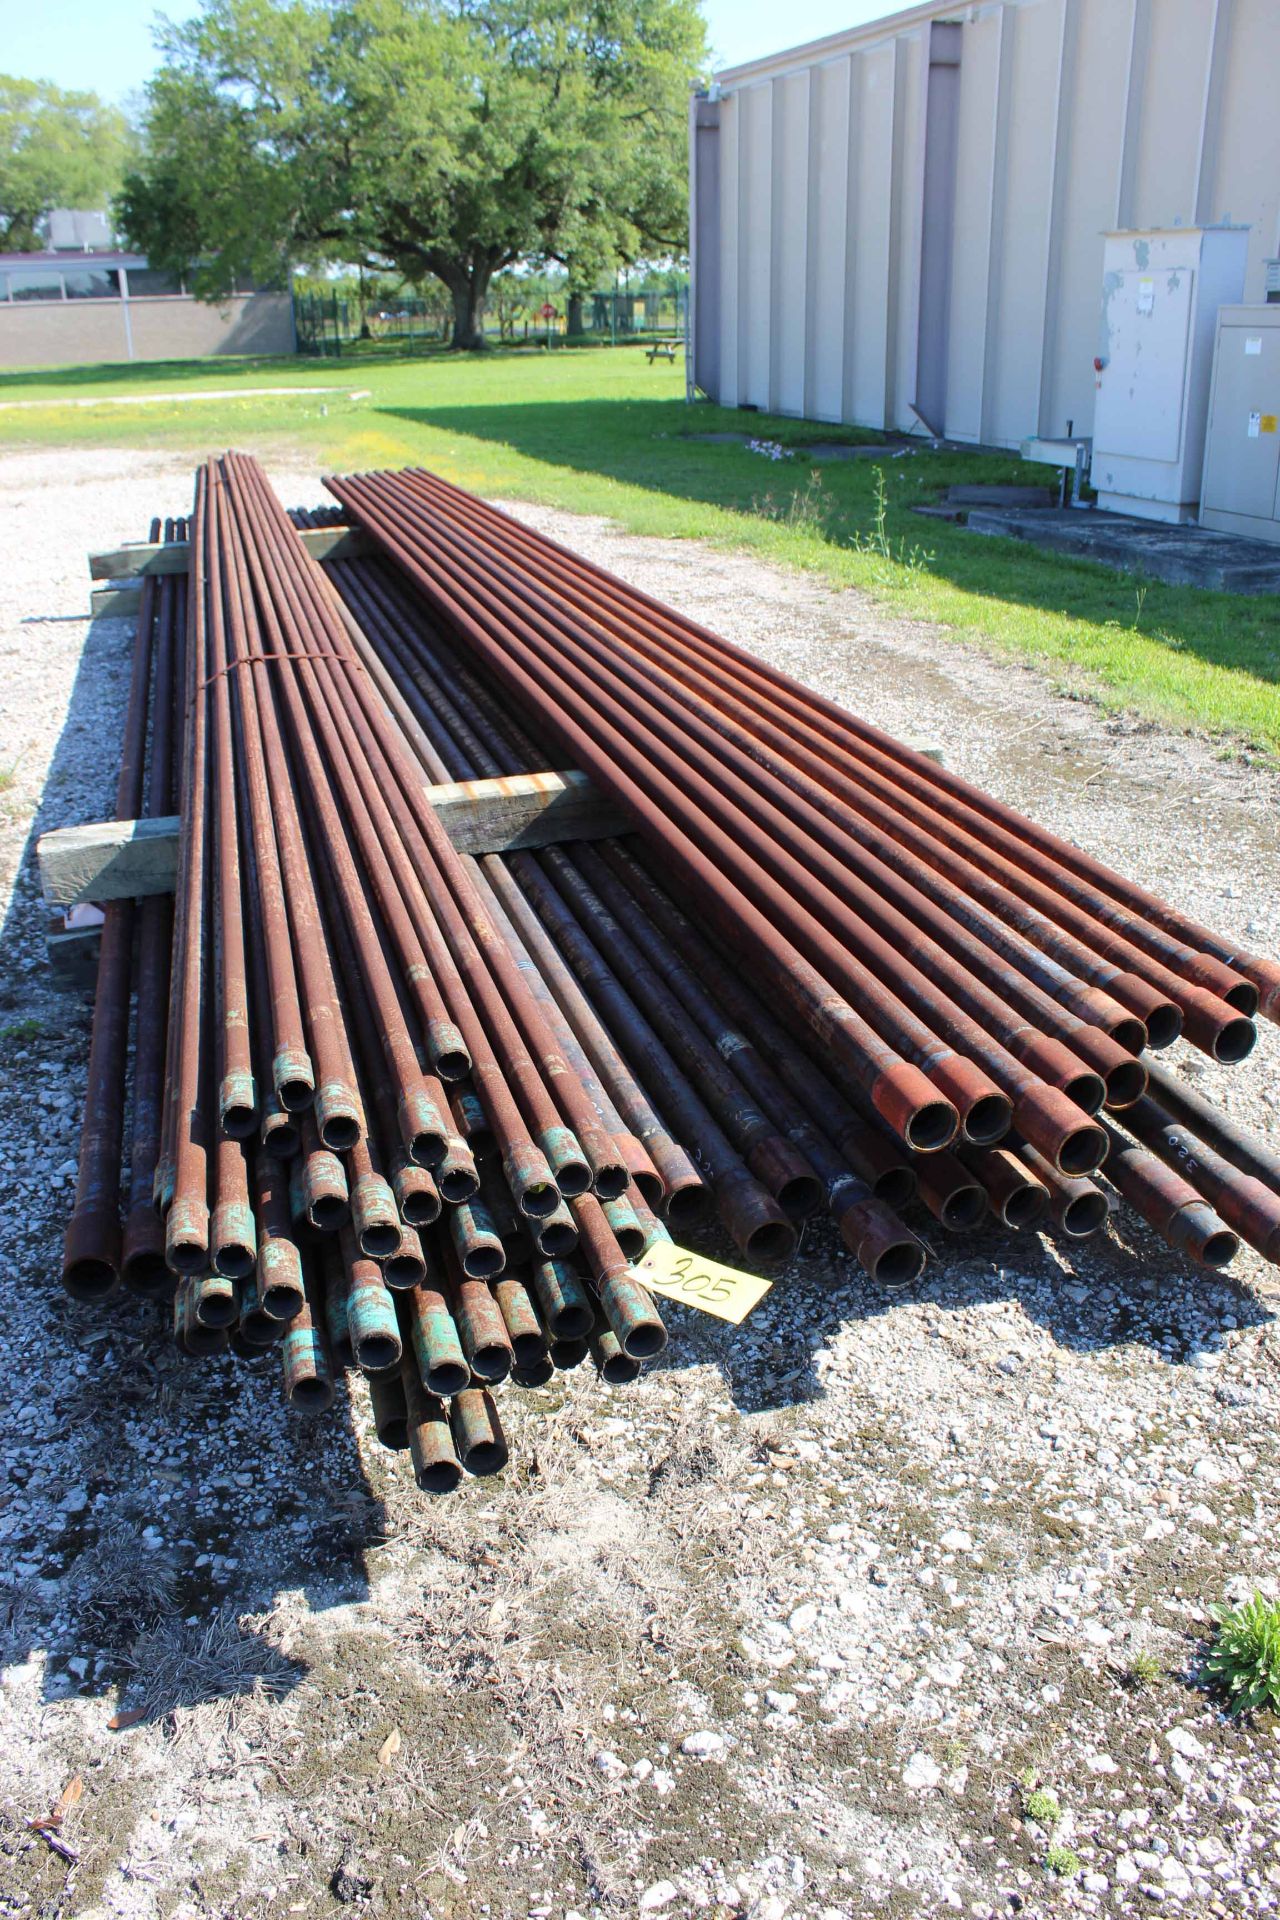 LOT OF DOWNHOLE TUBULARS, assorted, approx. (30) 2-5/8" & approx. (45) 1-5/8"